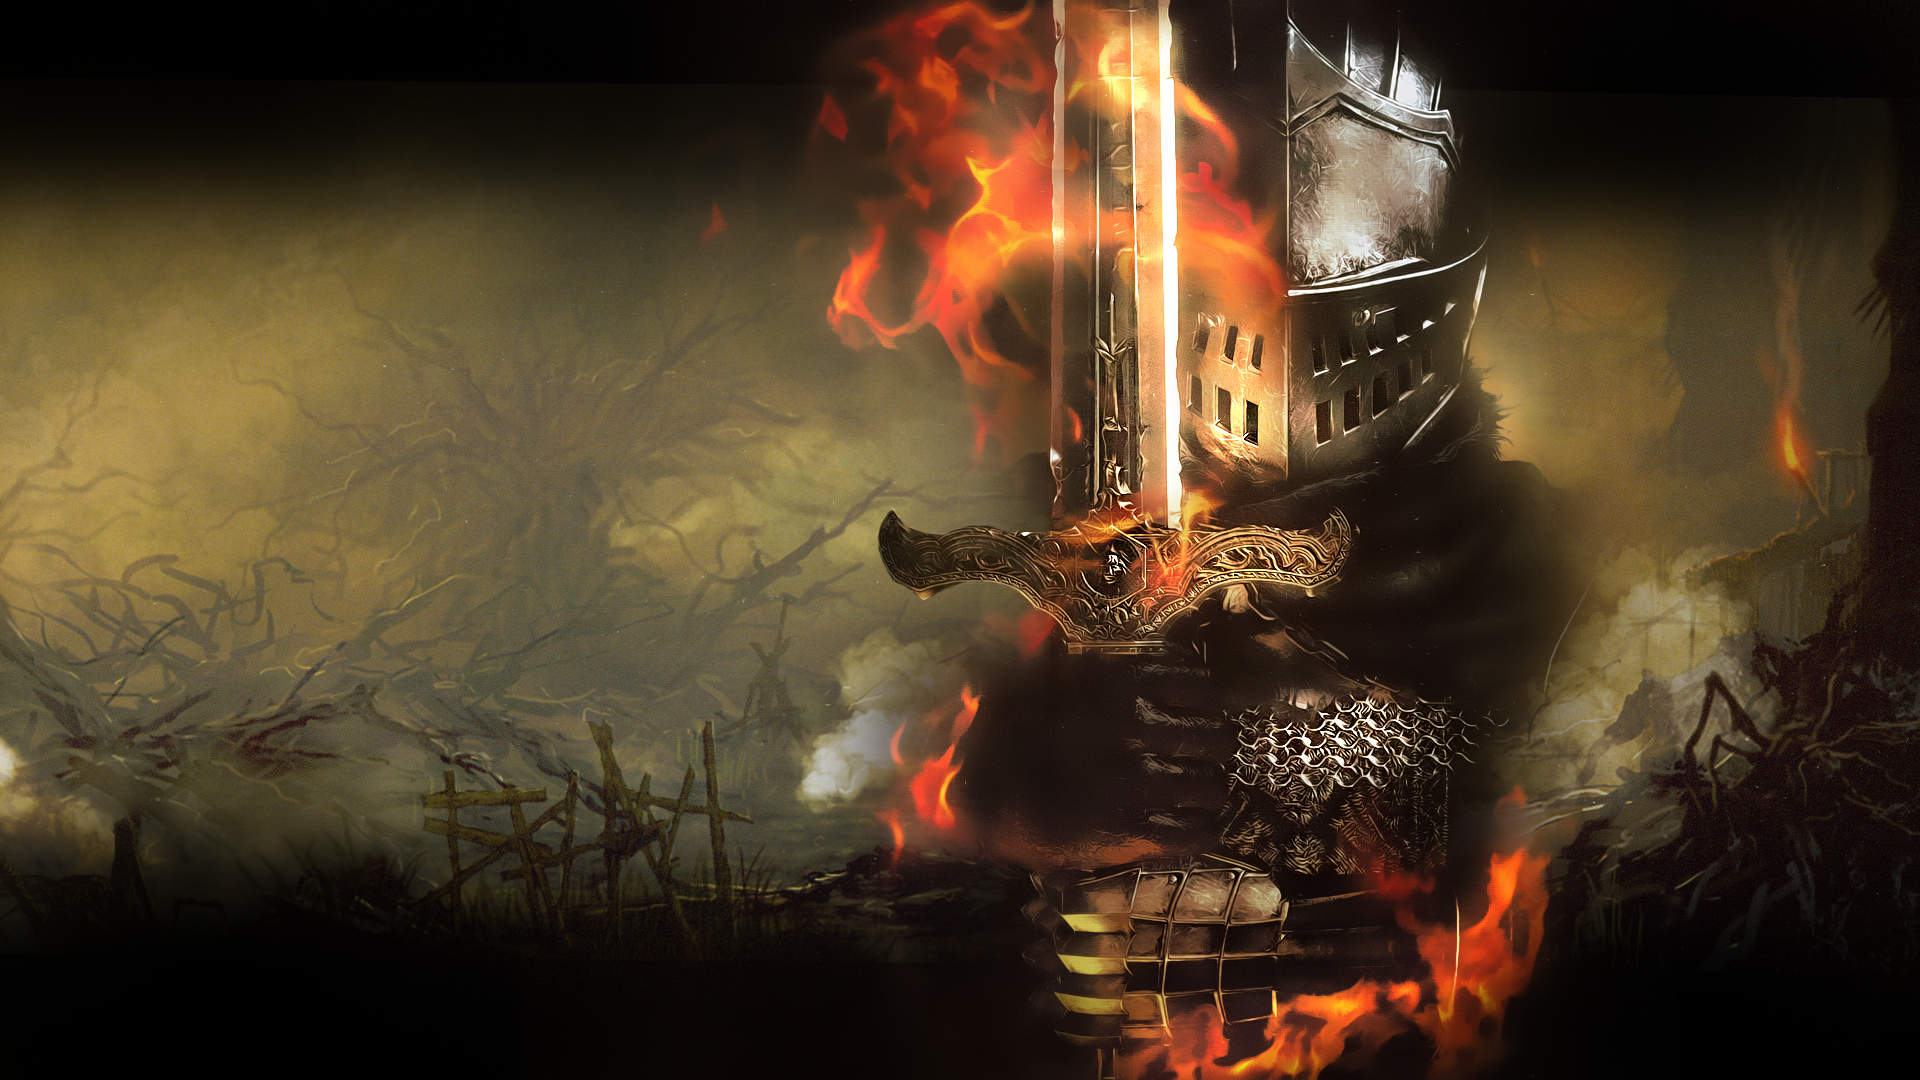 Download Dark Souls Wallpapers Android pictures in high definition or